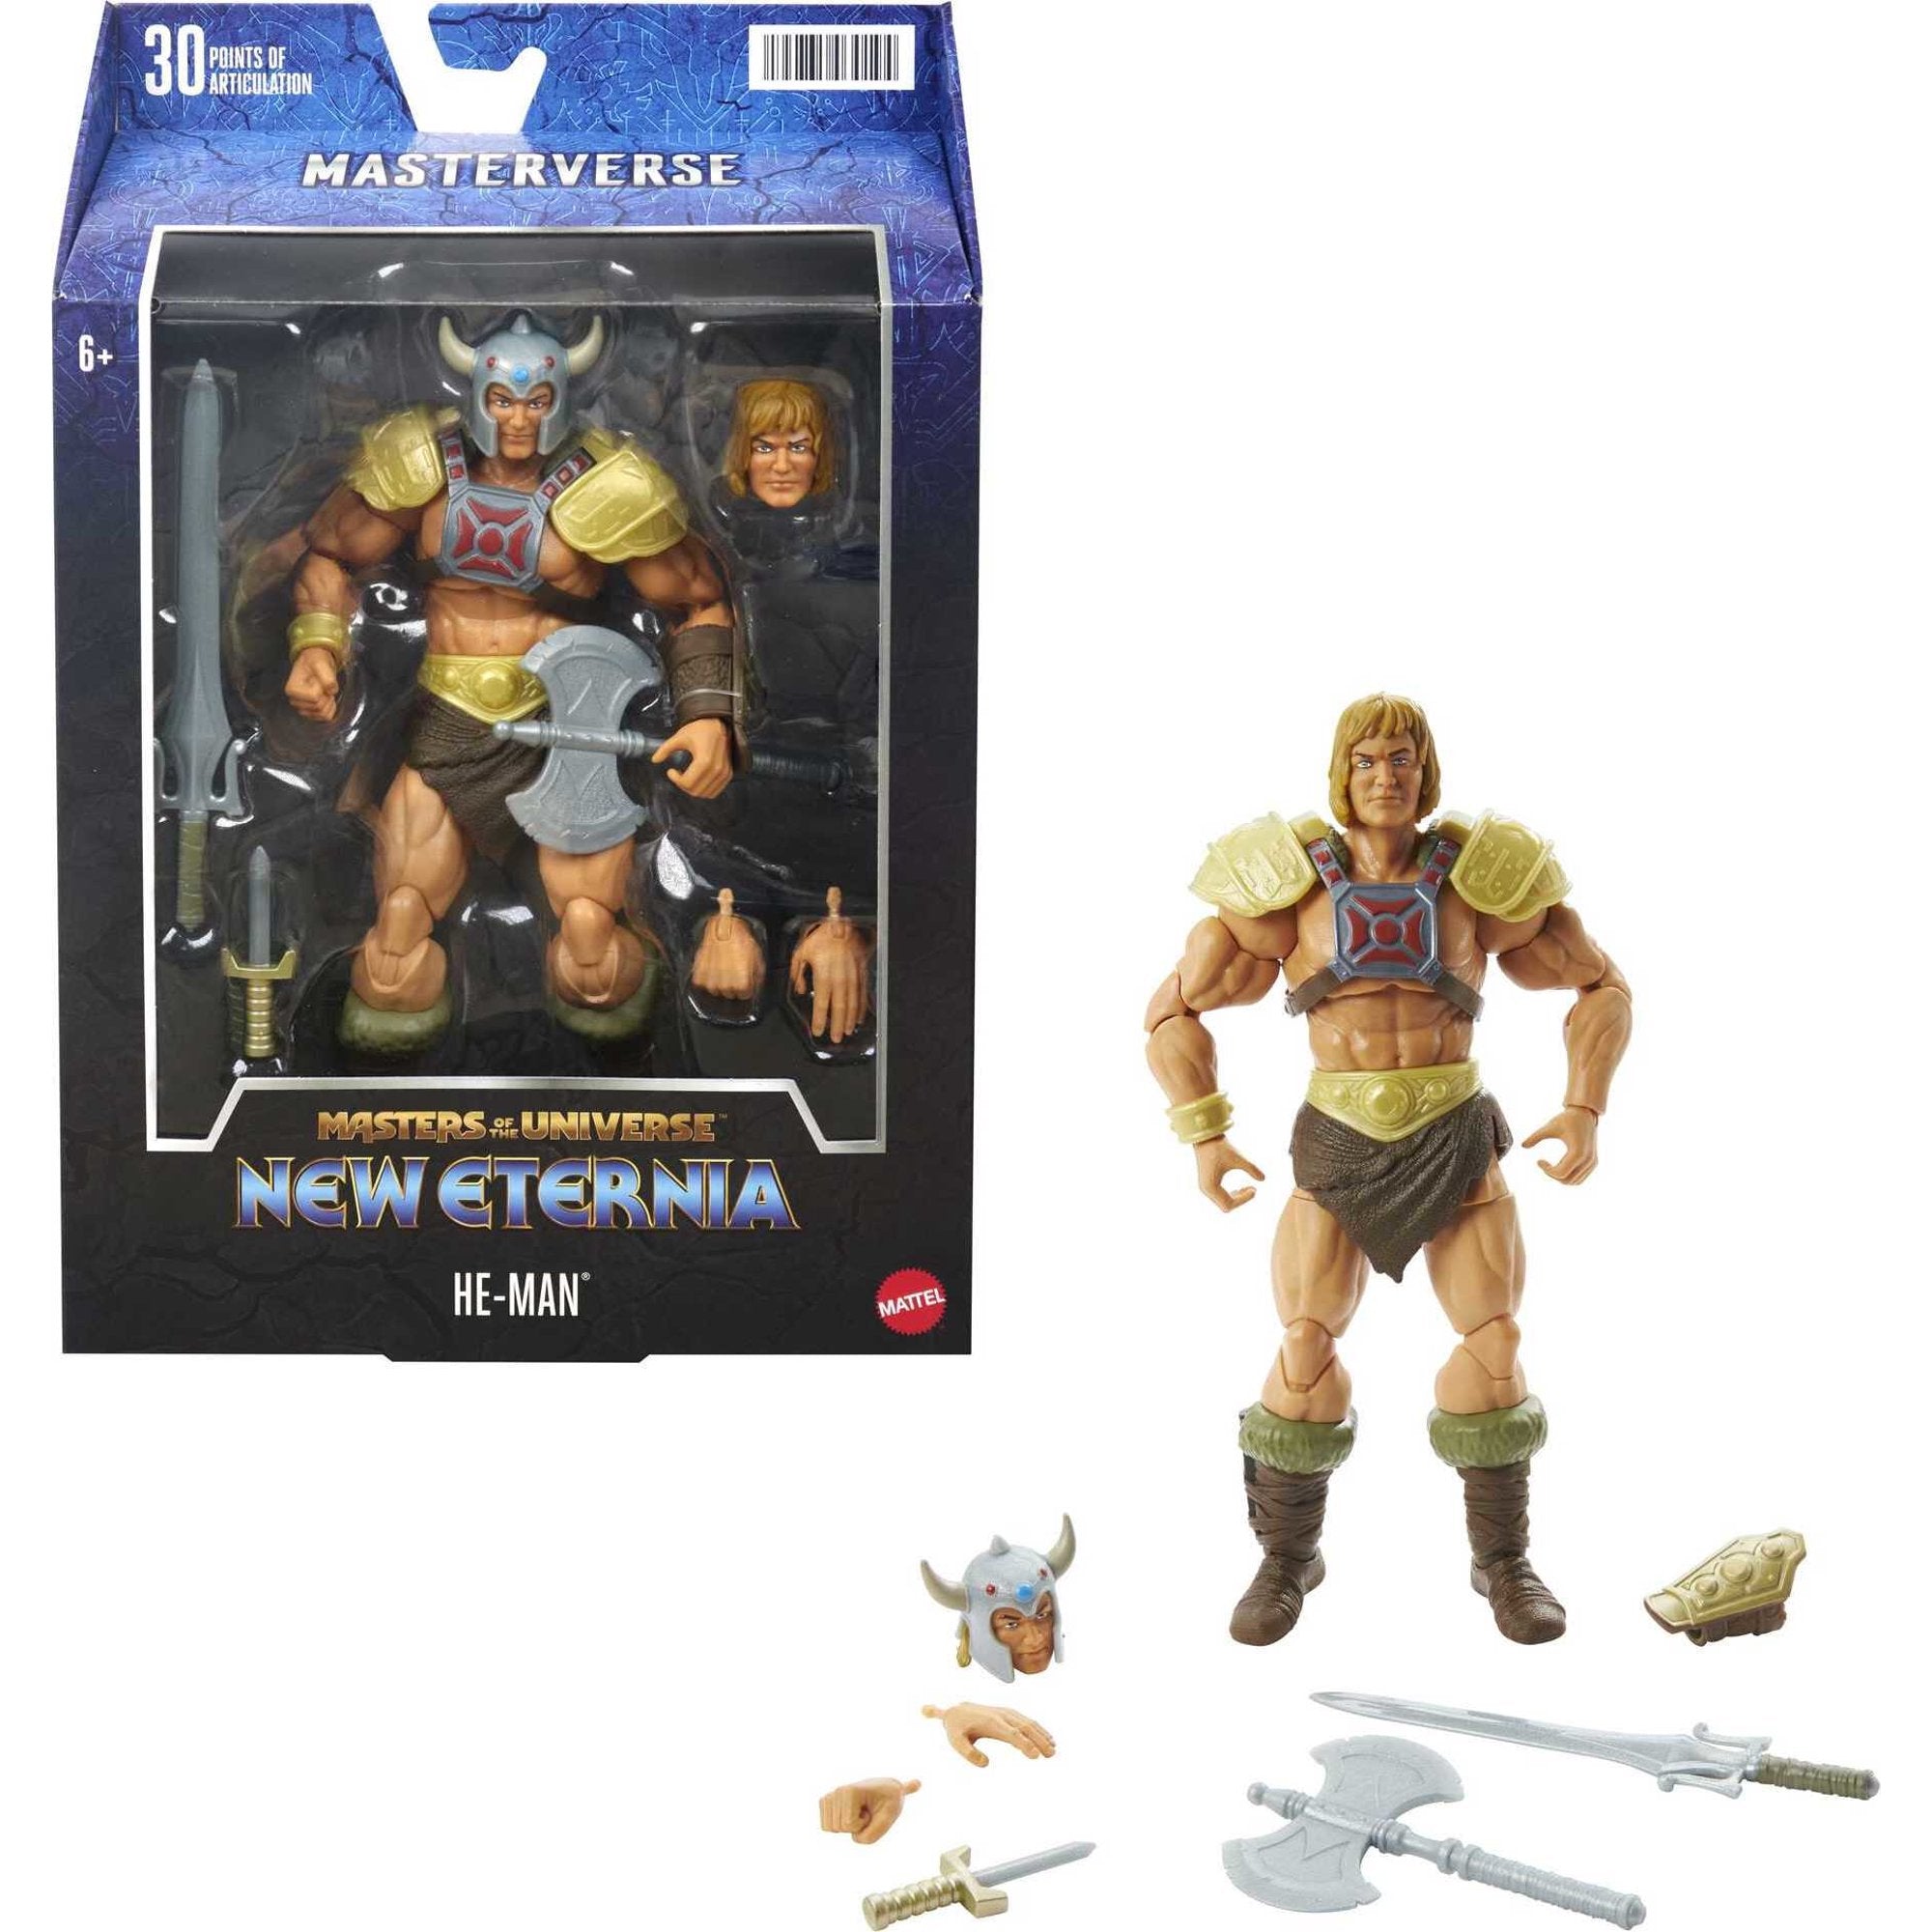 Masters of the Universe Masterverse New Eternia He-Man Action